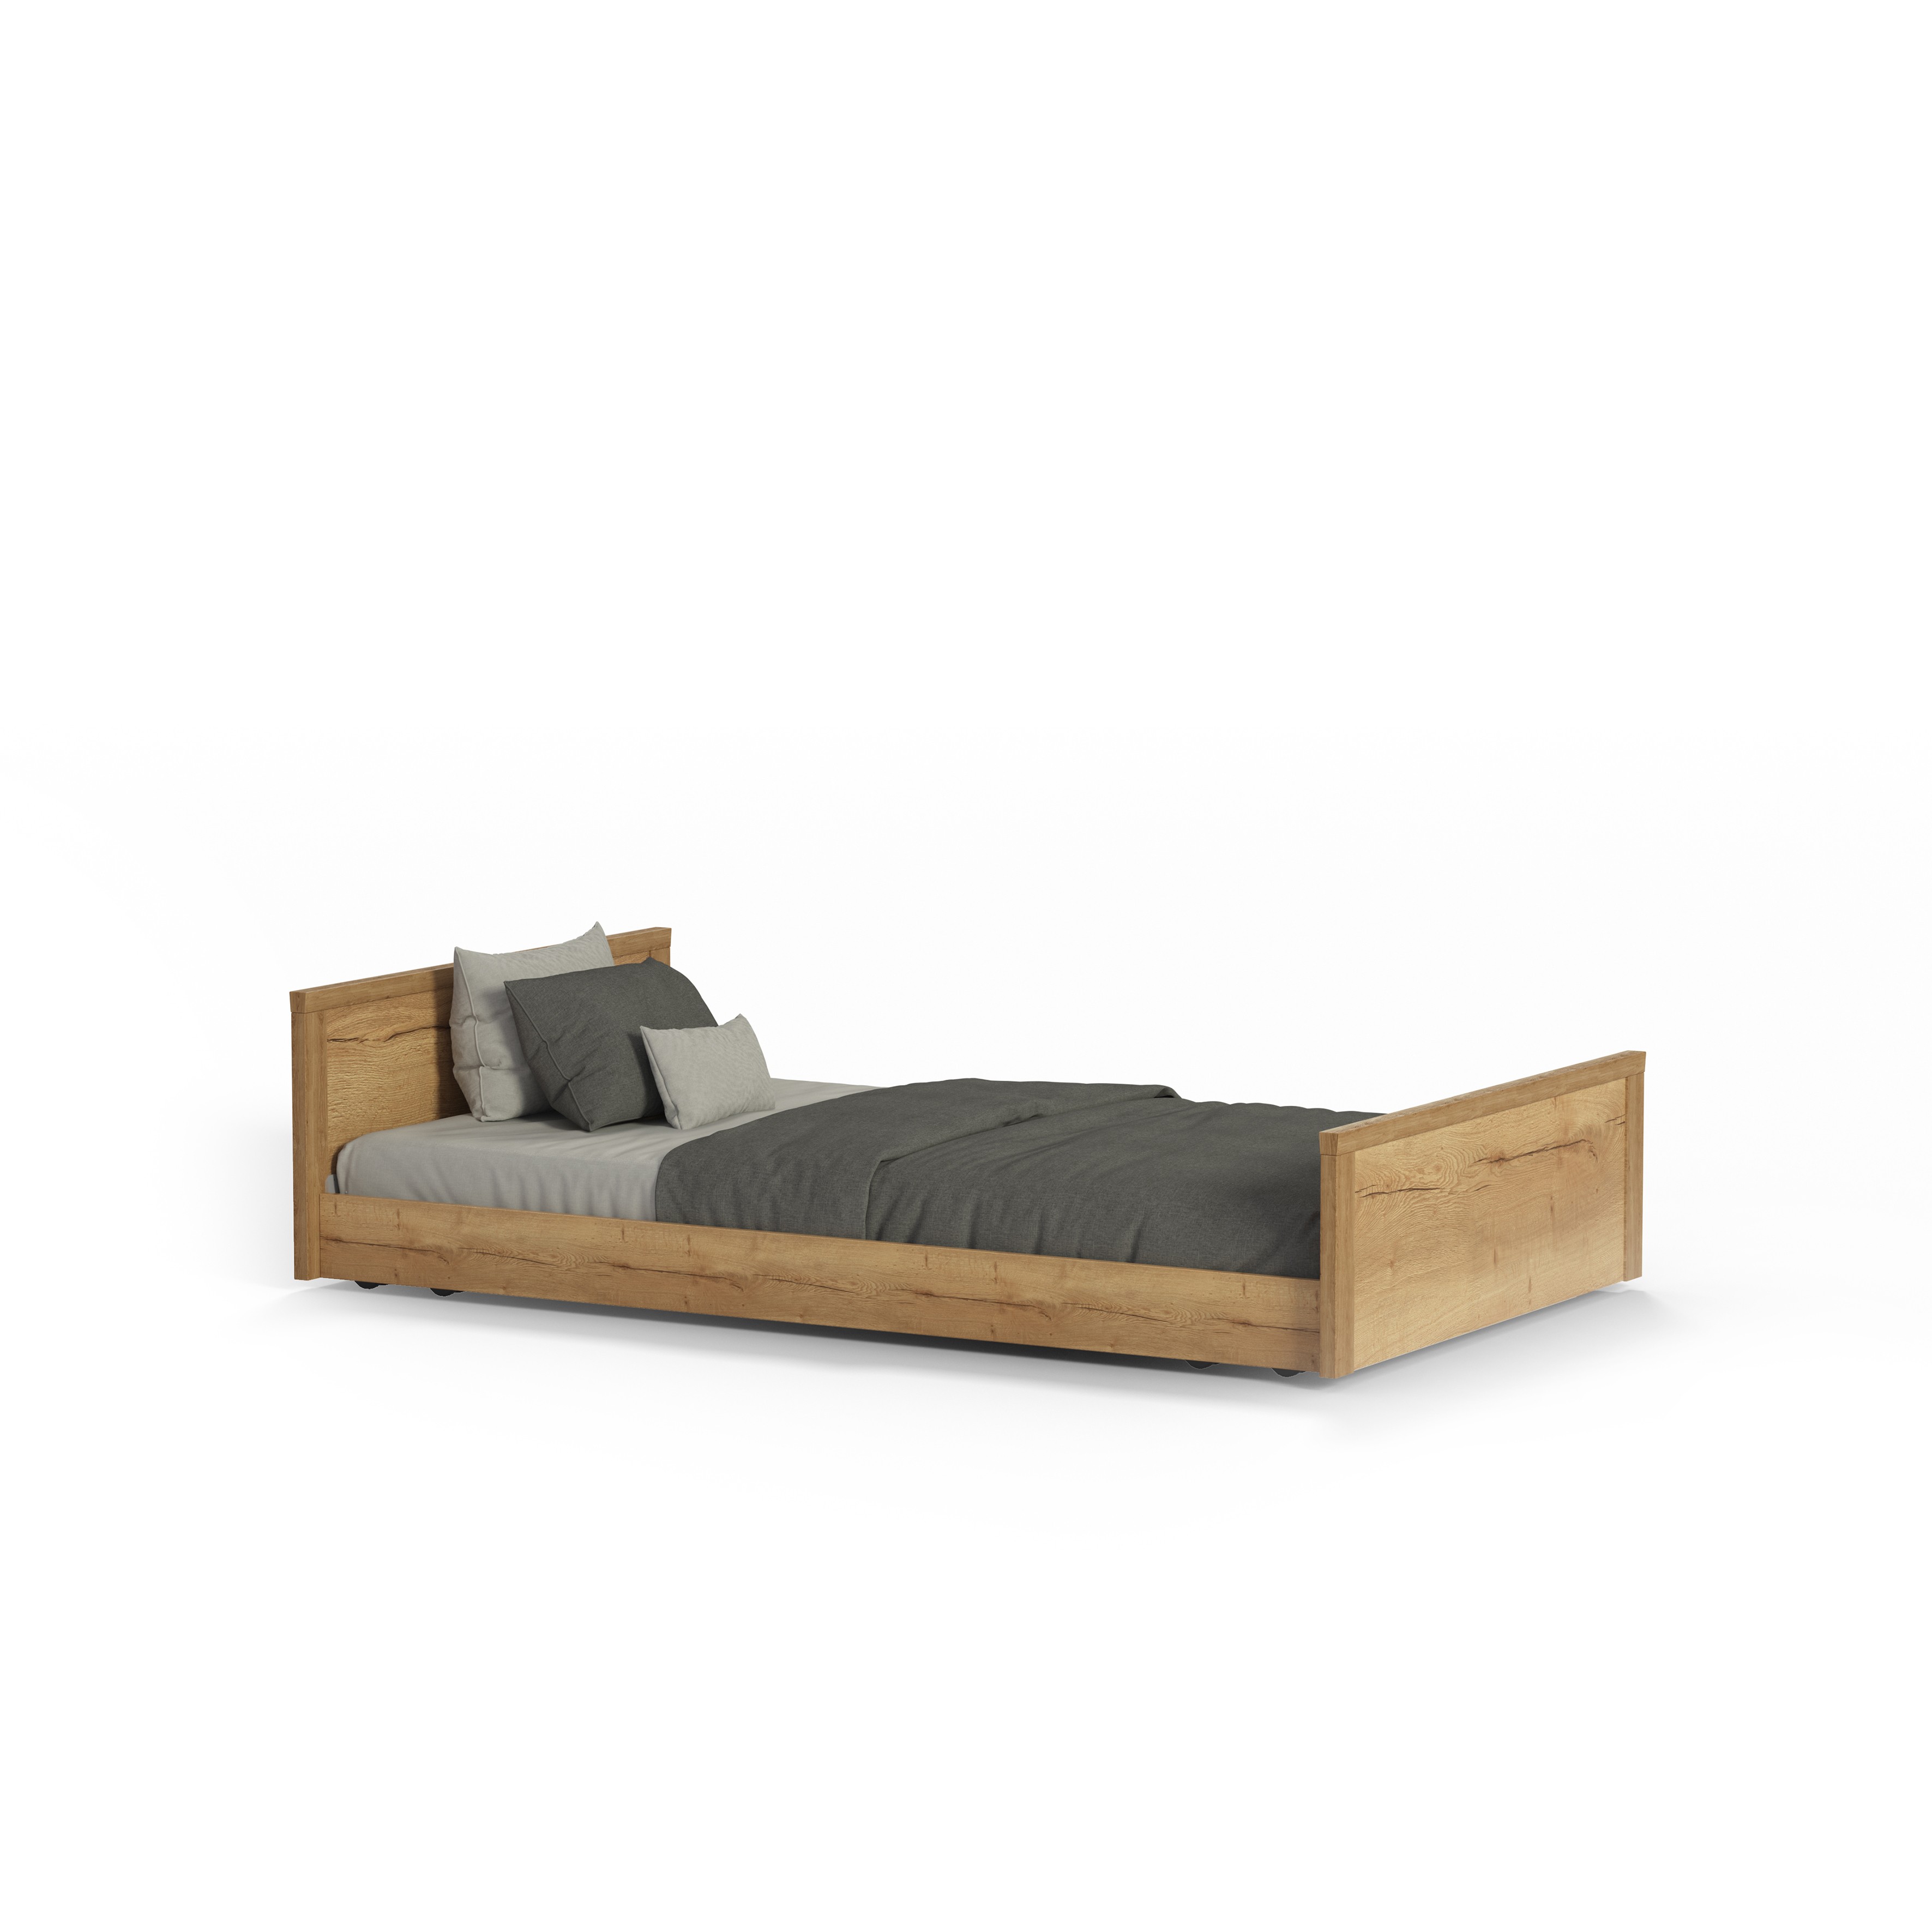 Ultra Low Care Bed "IMPULSE Edt. 500"